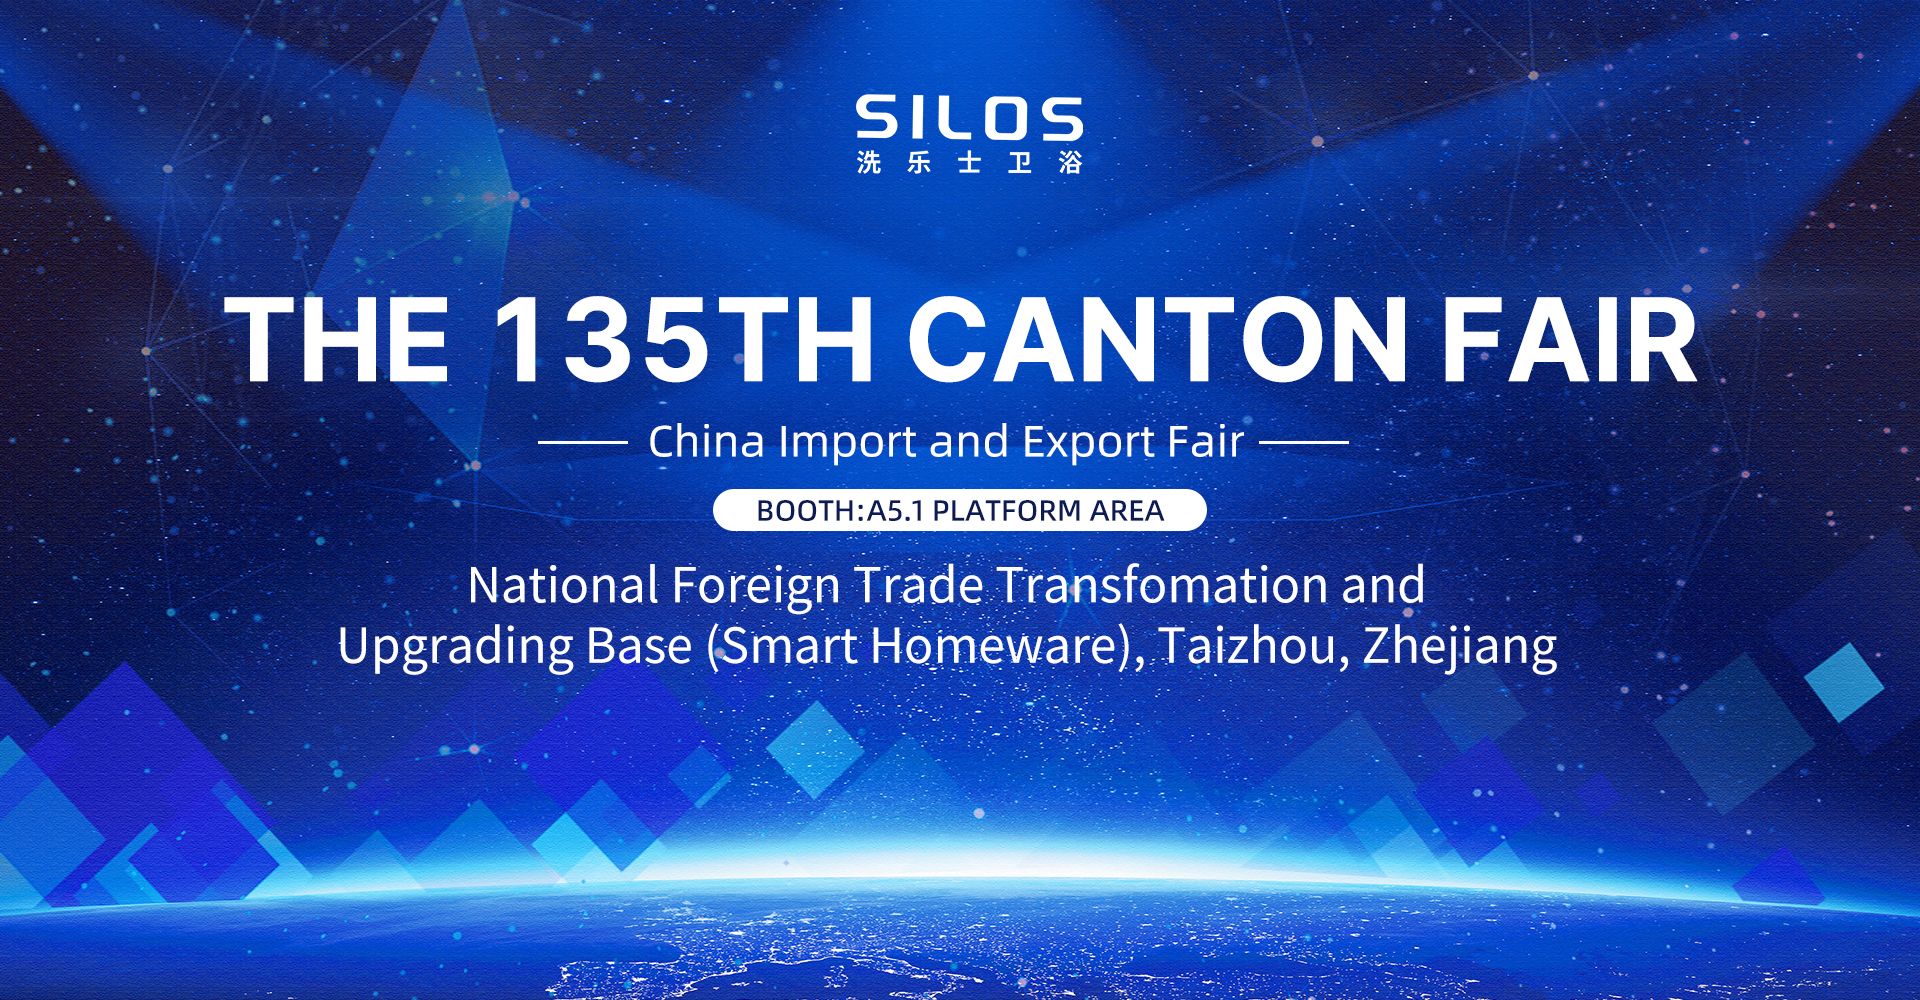 Taizhou Celex Sanitary Ware Technology Co., Ltd participated in the 135th Canton Fair, exhibition hall location A5.1